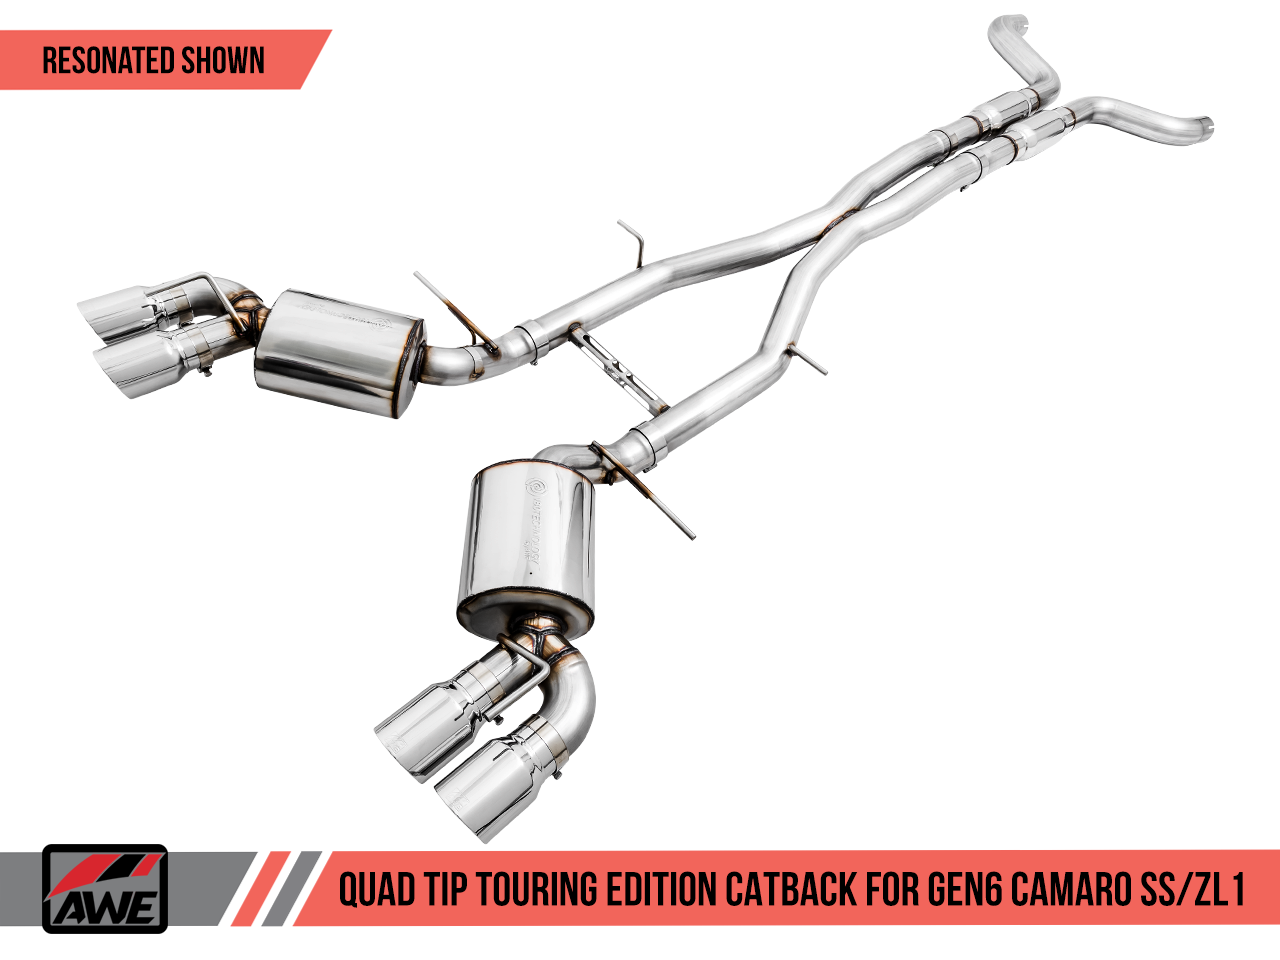 AWE Tuning Touring Edition Catback Exhaust for Gen6 Camaro SS / ZL1 - Resonated - Diamond Black Tips (Quad Outlet)